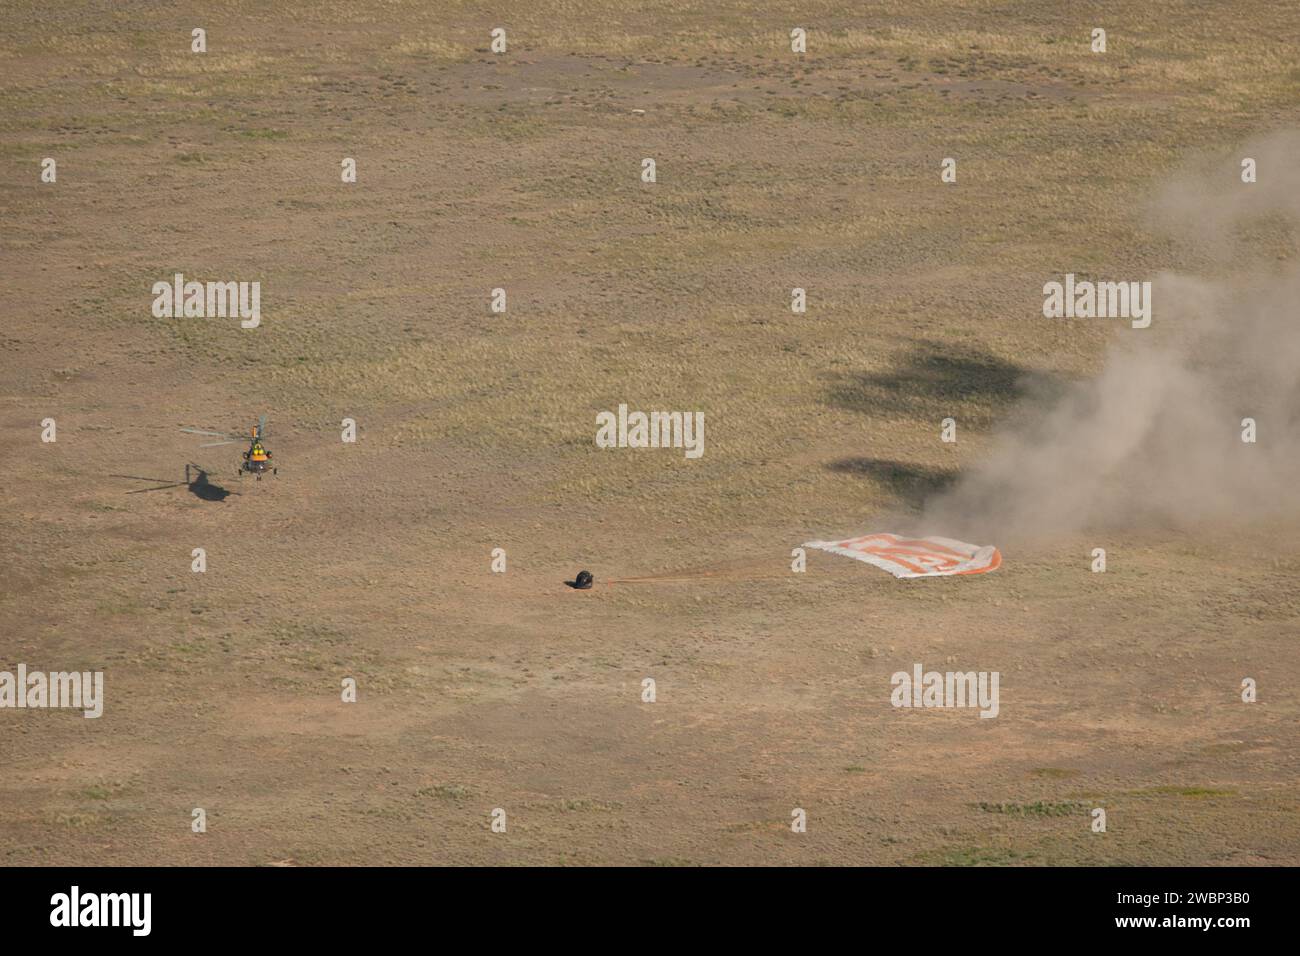 The Soyuz TMA-20 spacecraft is seen as it lands with Expedition 27 Commander Dmitry Kondratyev and Flight Engineers Paolo Nespoli and Cady Coleman in a remote area southeast of the town of Zhezkazgan, Kazakhstan, on Tuesday, May 24, 2011.   NASA Astronaut Coleman, Russian Cosmonaut Kondratyev and Italian Astronaut Nespoli are returning from more than five months onboard the International Space Station where they served as members of the Expedition 26 and 27 crews. Stock Photo